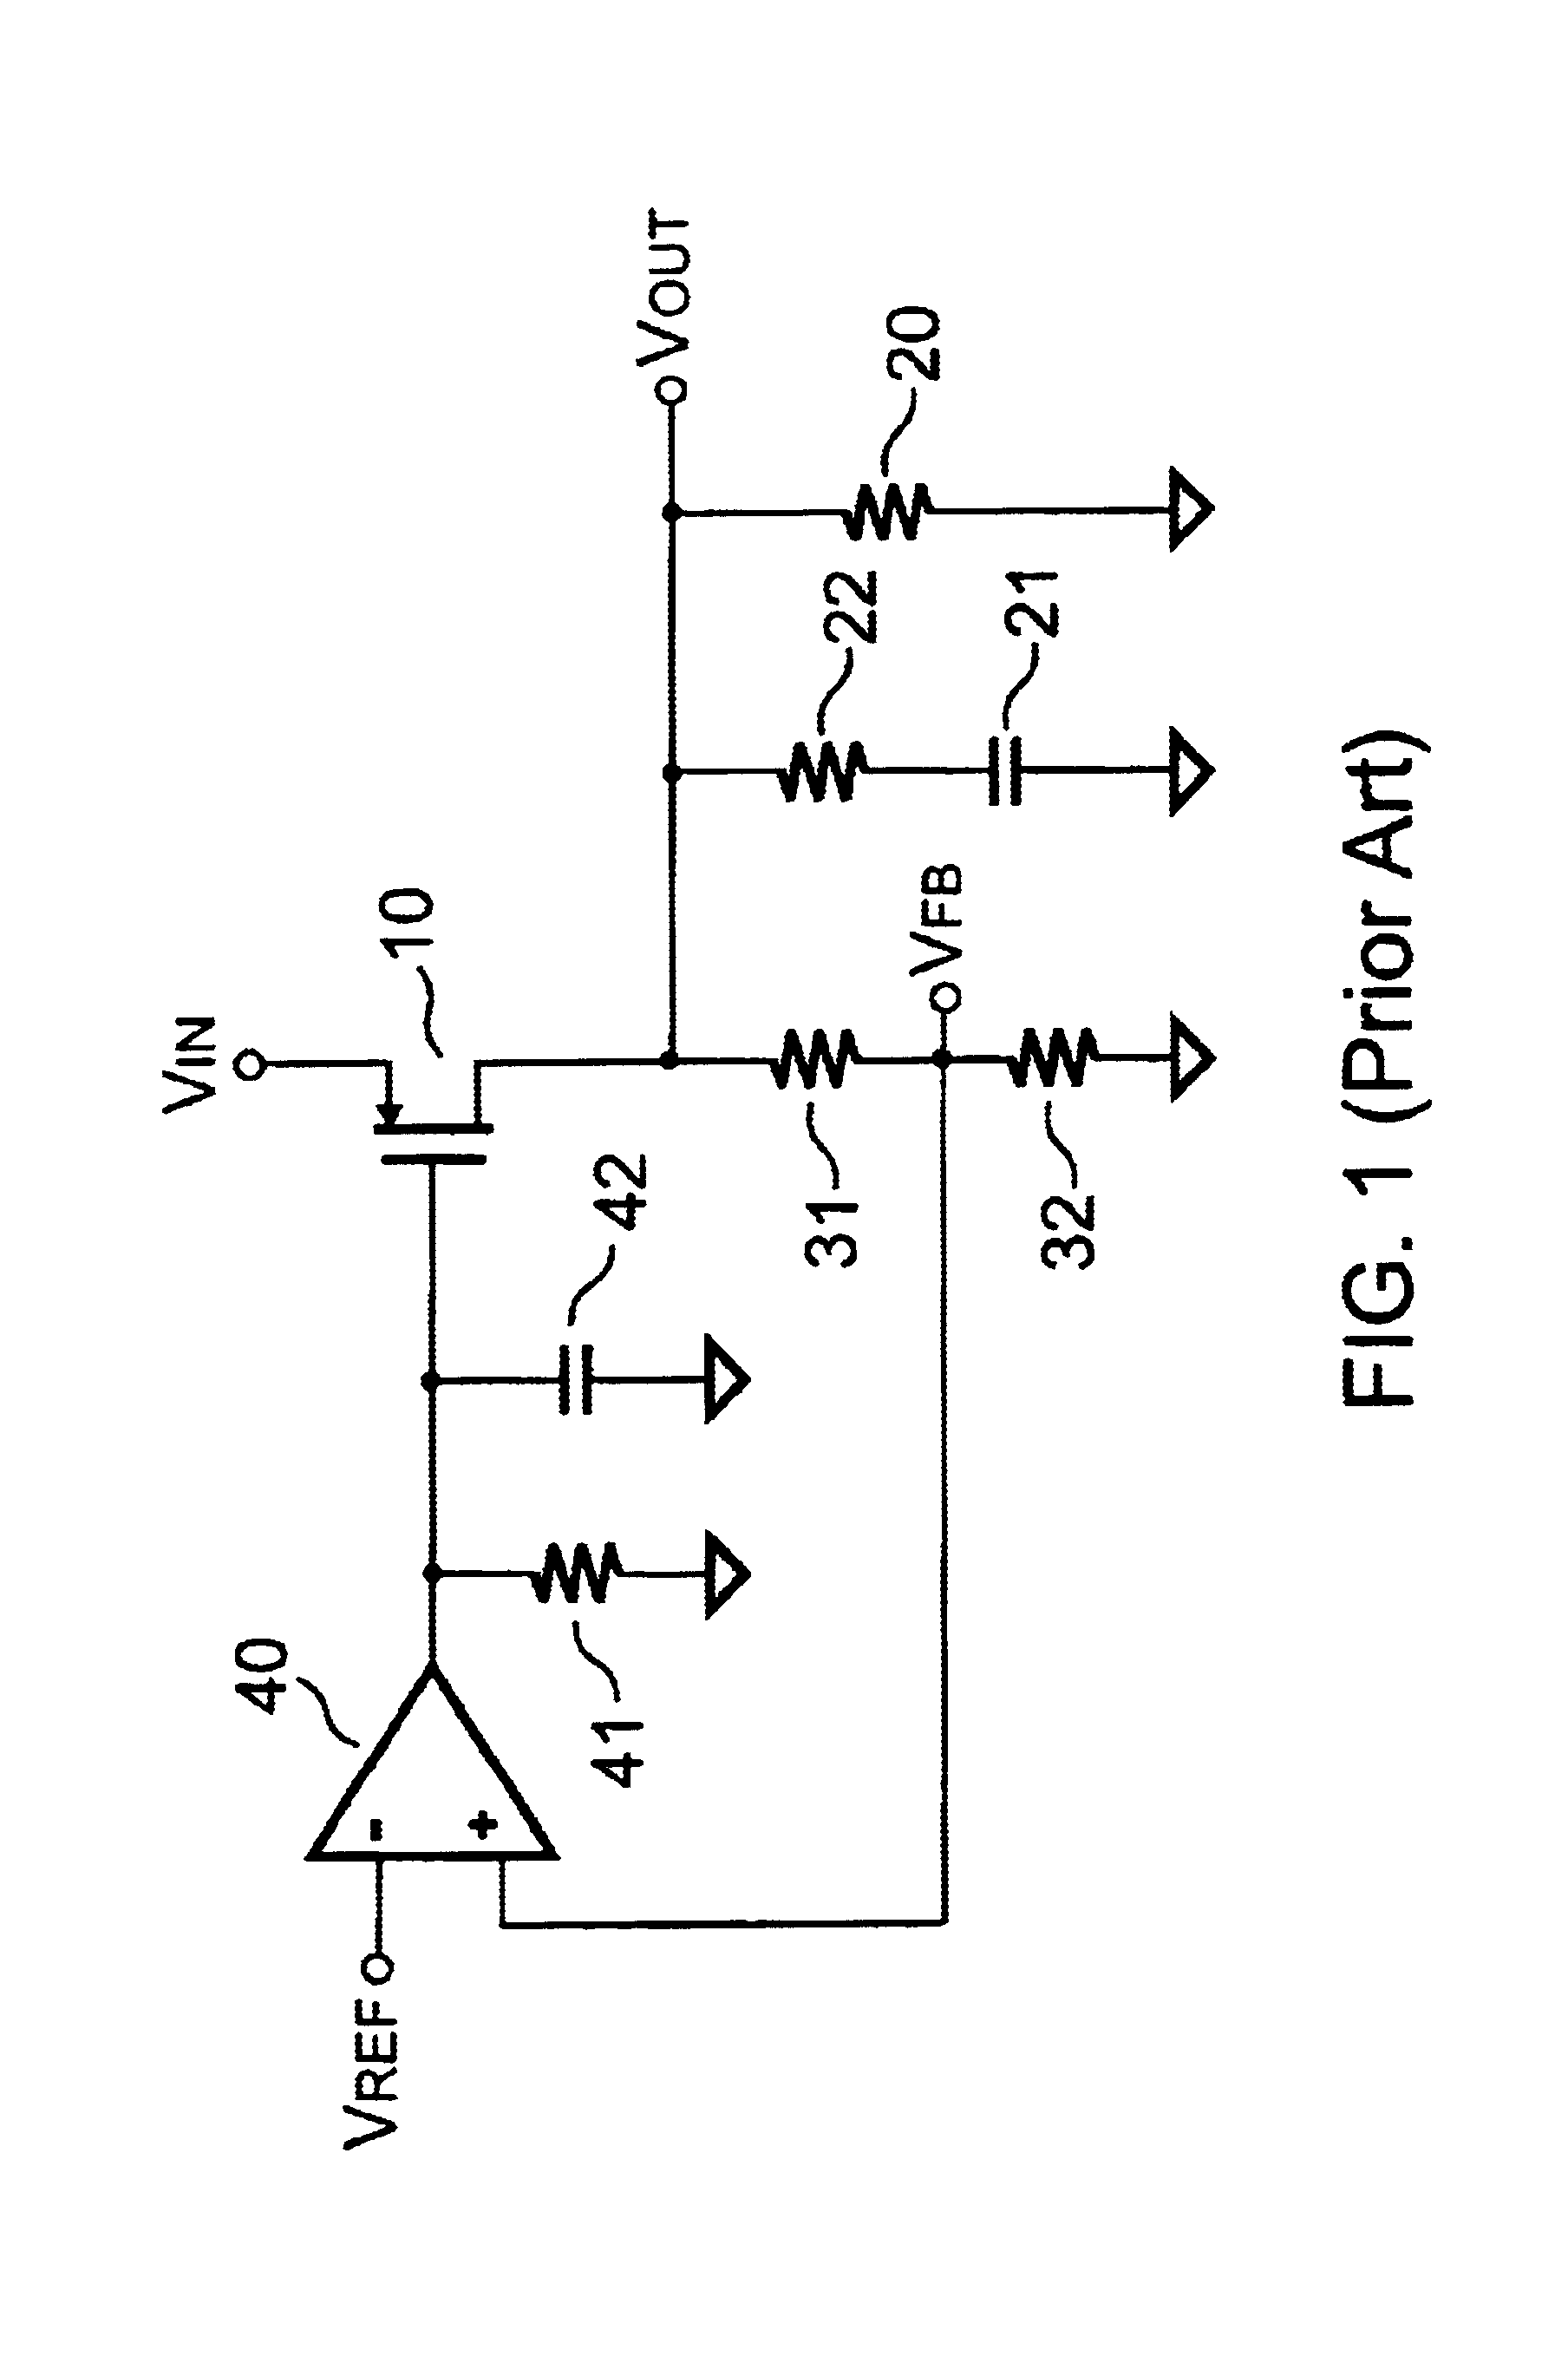 Low drop-out voltage regulator and an adaptive frequency compensation